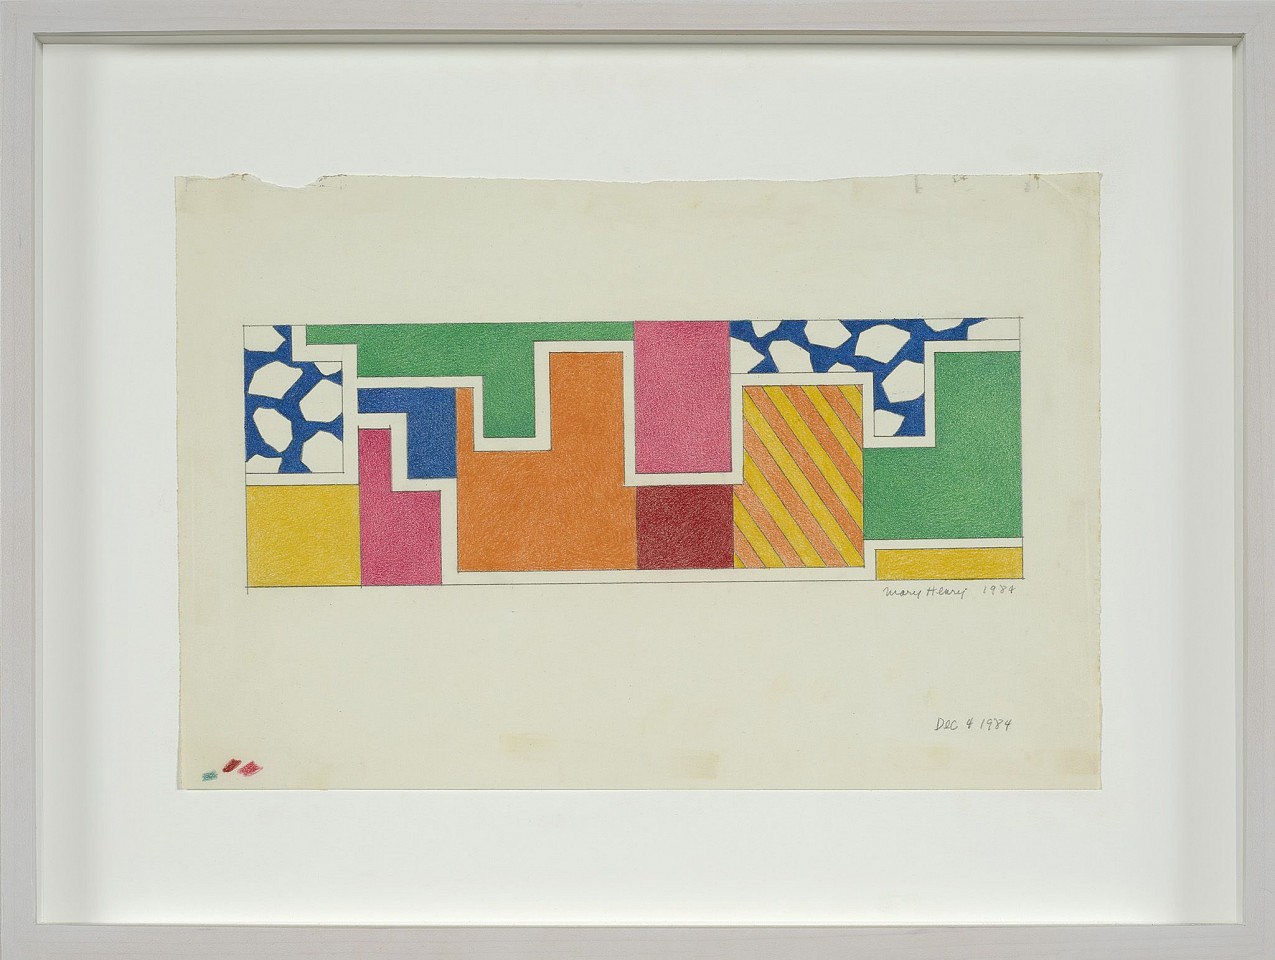 Mary Dill Henry, Untitled (December 4), 1984
Prismacolor and graphite on paper, 9 1/2 x 14 1/4 in. (24.1 x 36.2 cm)
MHEN-00170